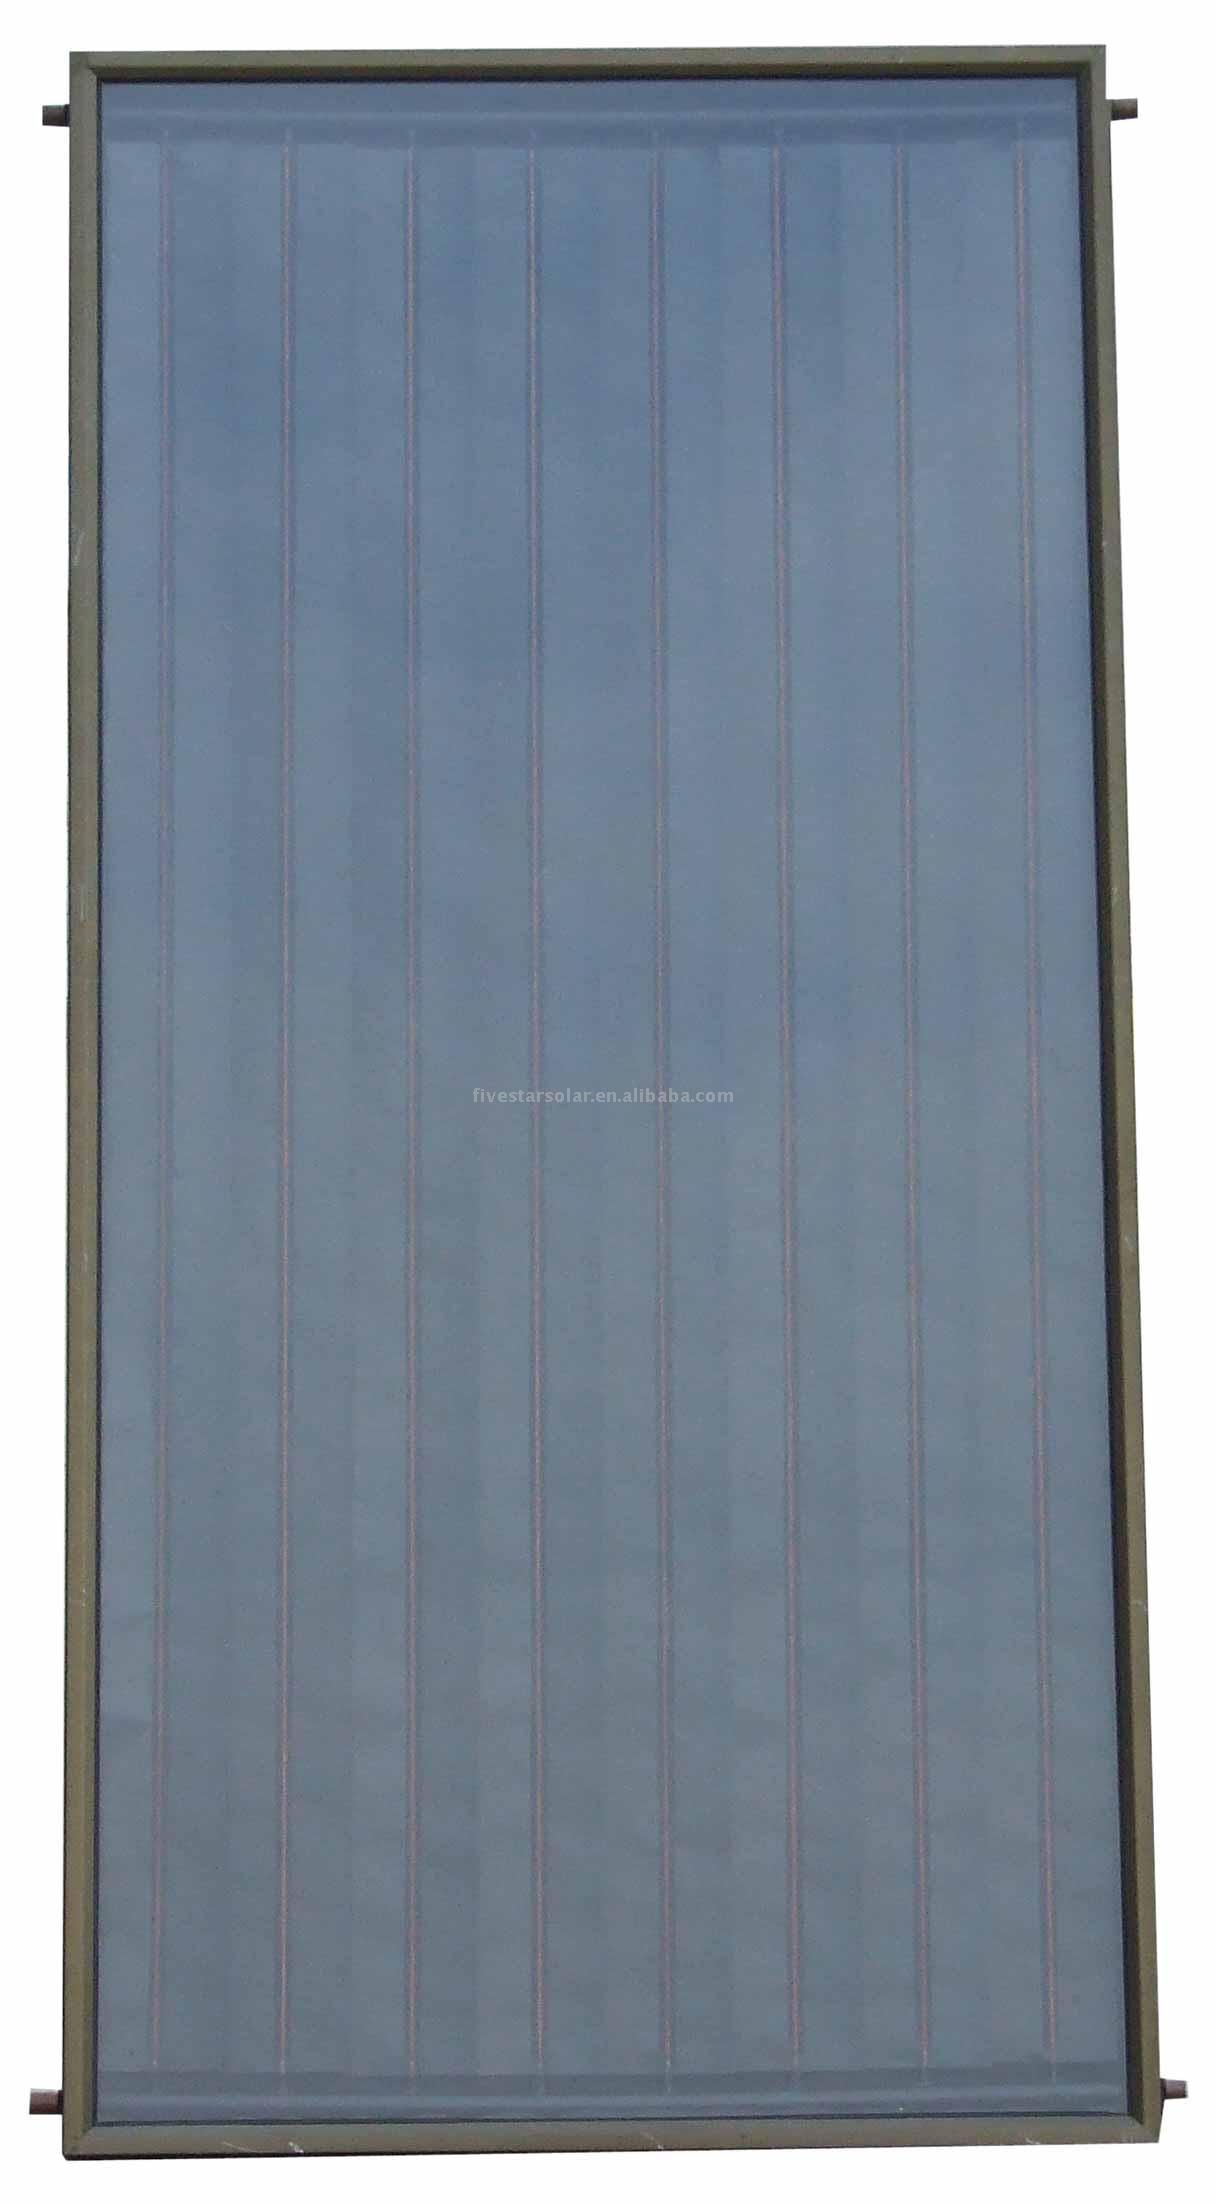  FP2.0 Flat Plate Solar Collector (FP2.0 Flat Plate Solar Collector)